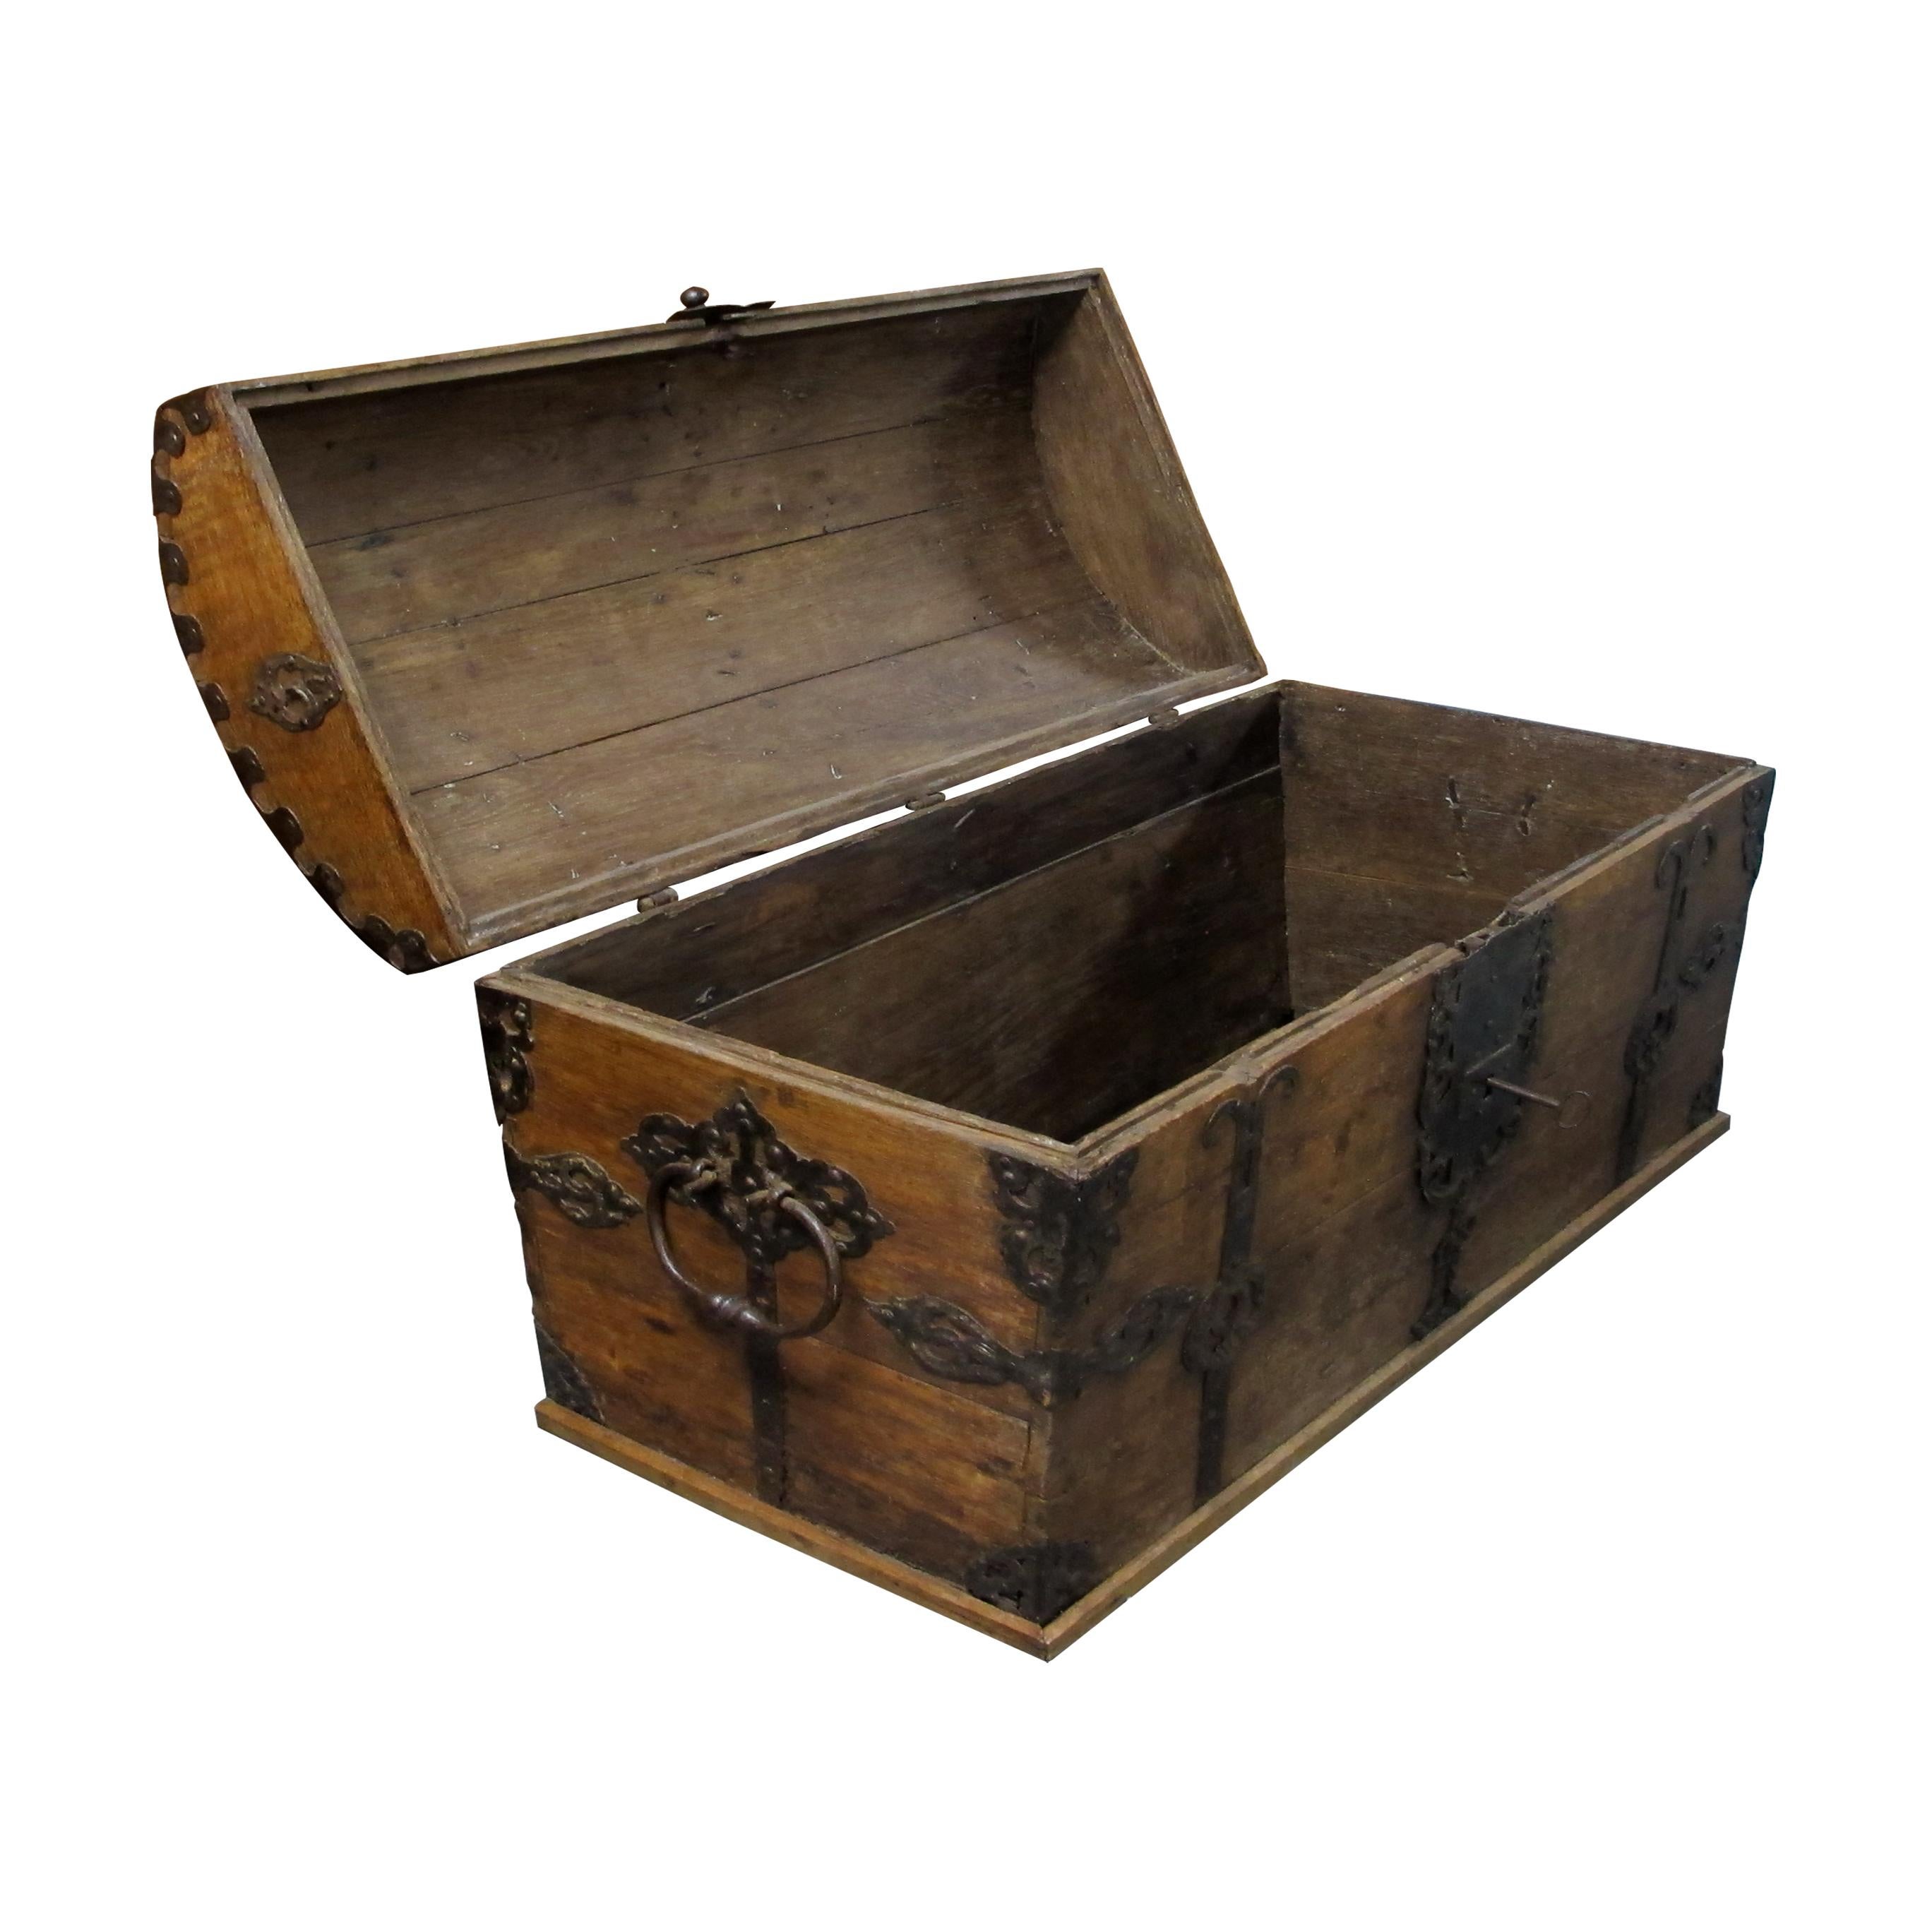 Mid-18th Century Antique 18th Century Trunk-Coffer with Dome Top and Ornate Metal Work